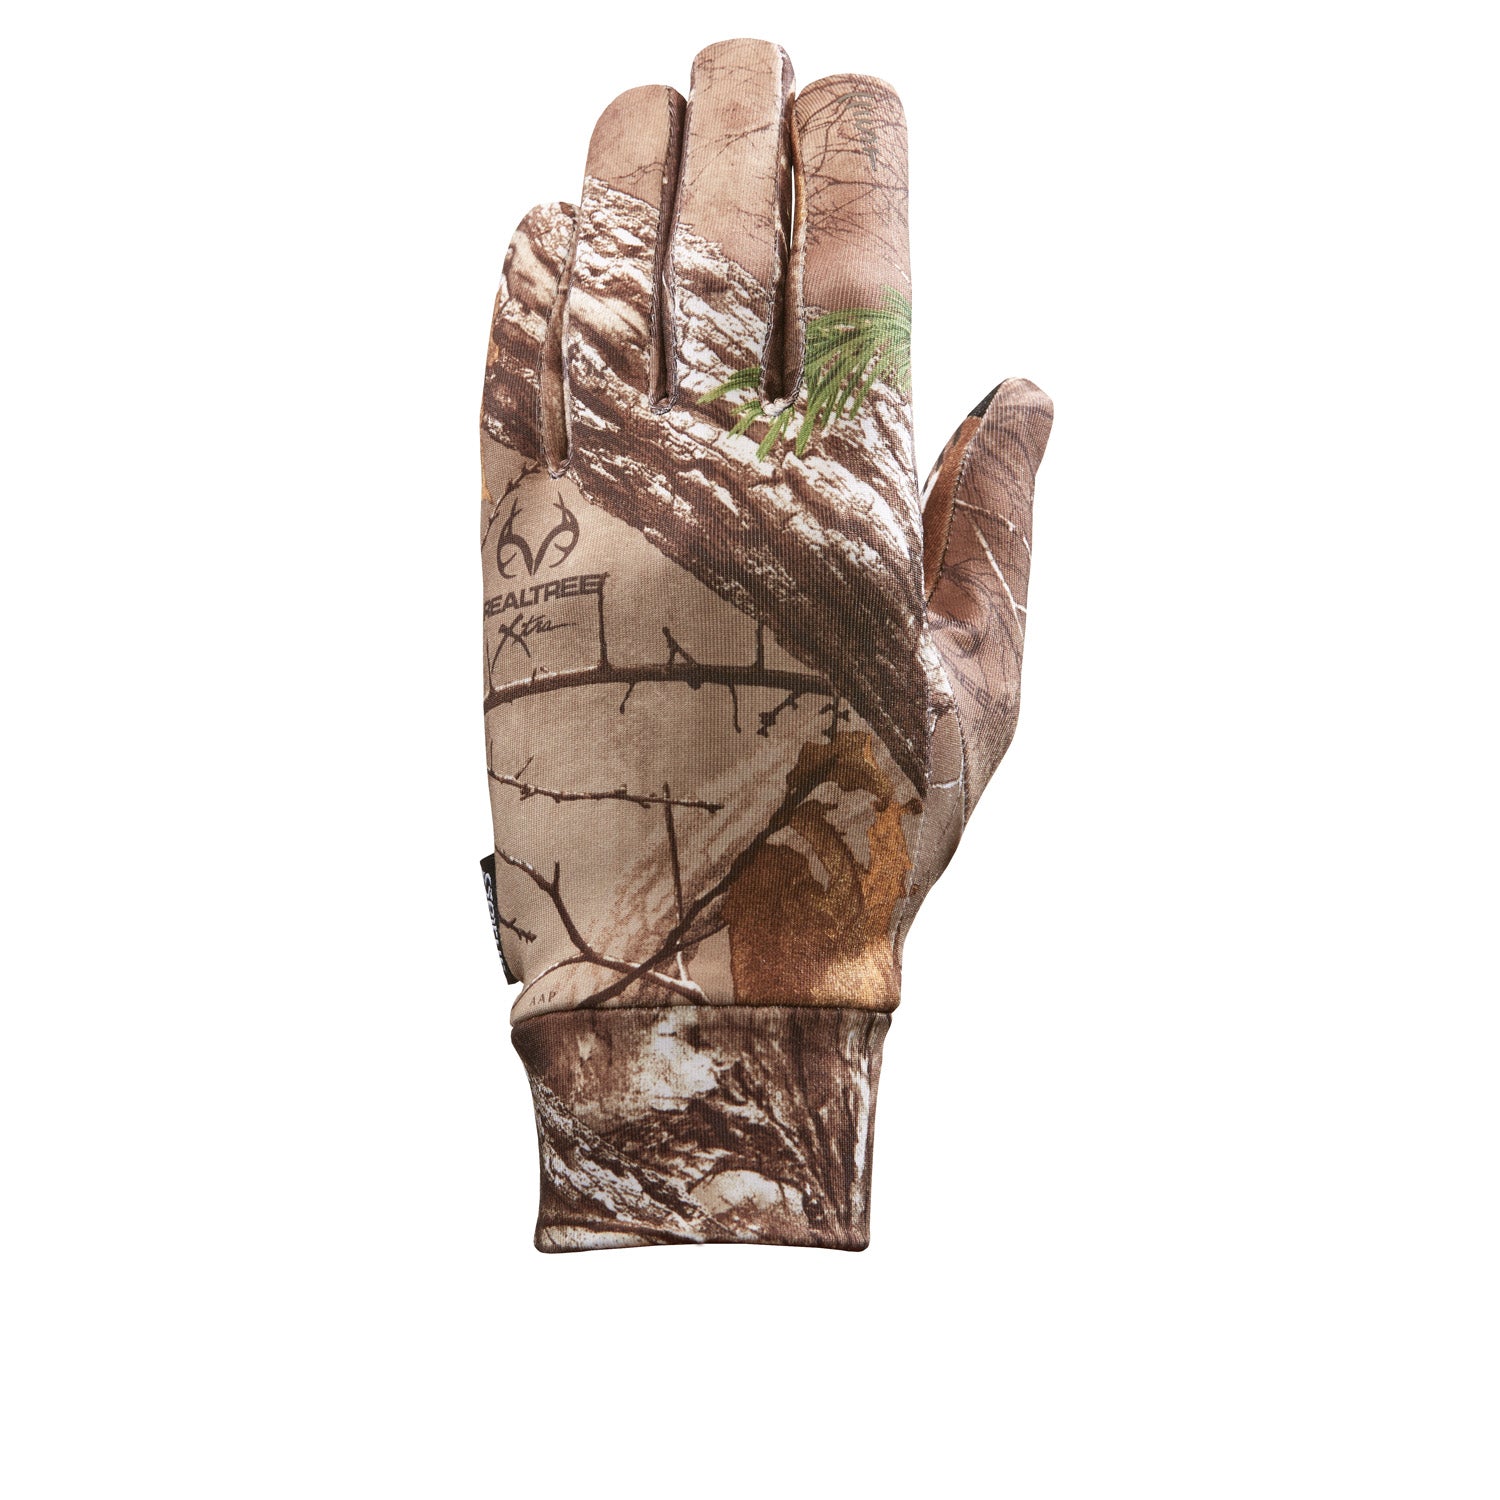 Seirus Soundtouch Dynamax Glove Liner Camo Rltree Xtra LG XL